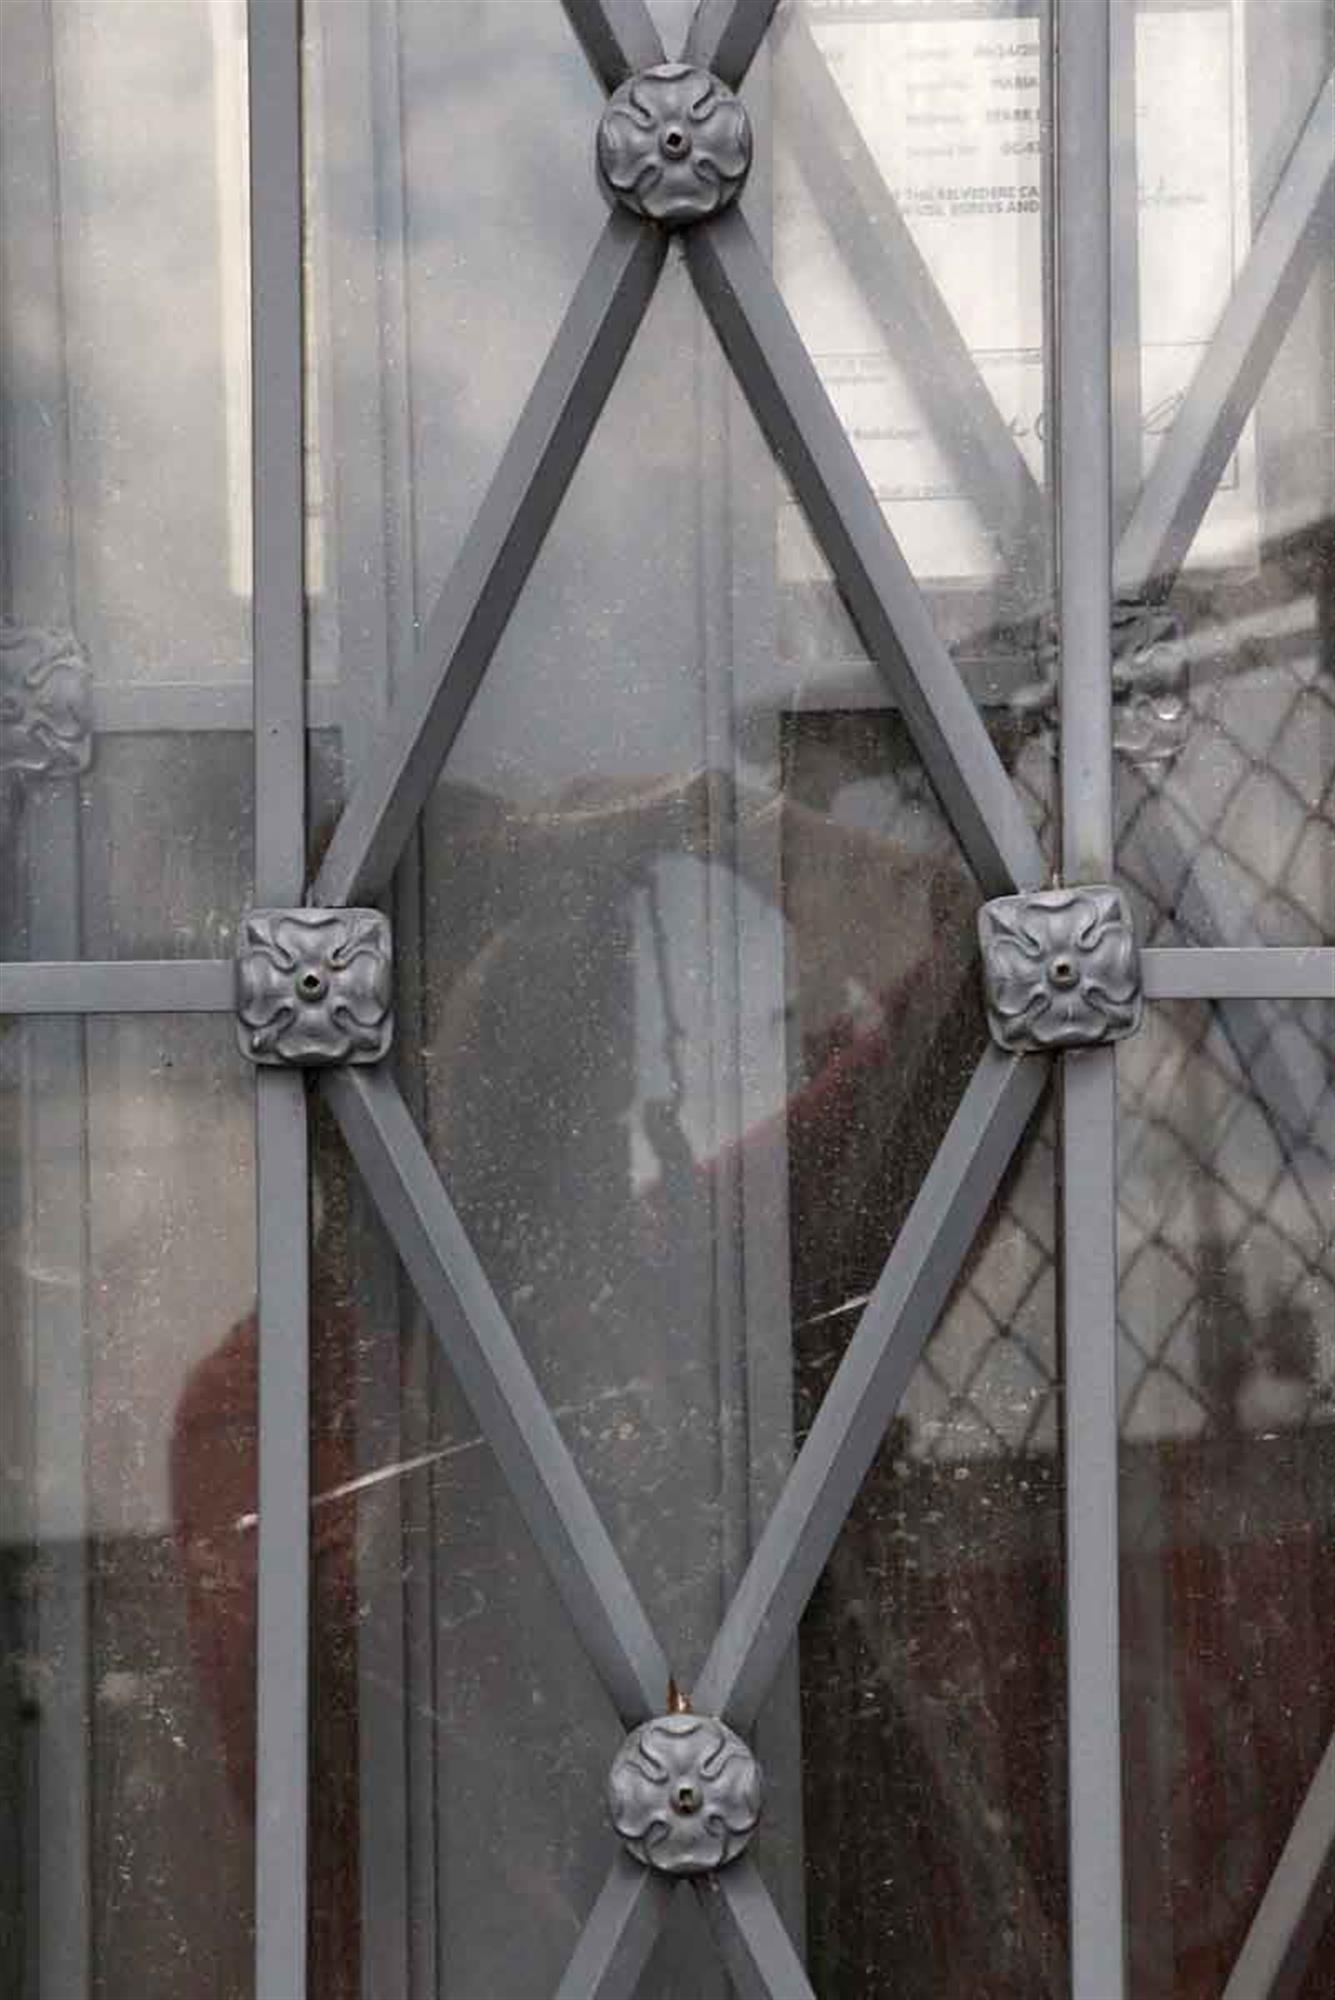 This door is from a 1930 building in upstate New Jersey. The glass is in good condition with a diamond lattice design that is finished with floral rosettes. Several doors available at time of posting. Some doors have damages and rust on the frame.